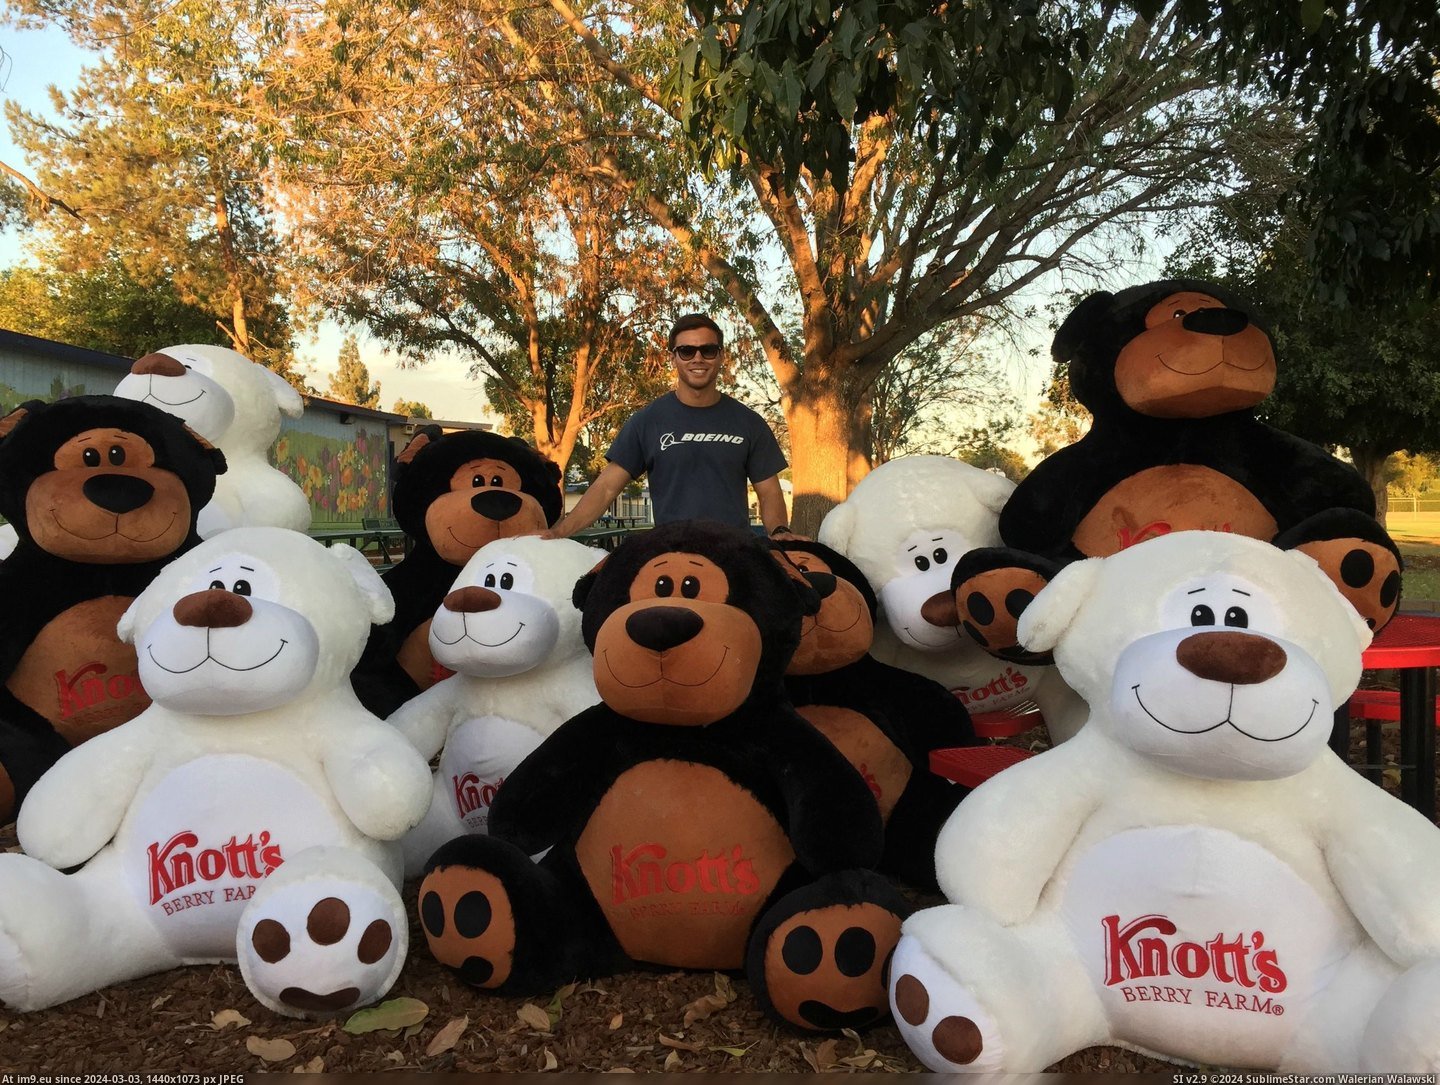 #Funny #Thought #Farm #Bears #Berry #Giant #Win [Funny] I was so preoccupied with the thought of whether or not I could win 10 giant bears from Knott's Berry Farm, I didn't sto Pic. (Изображение из альбом My r/FUNNY favs))